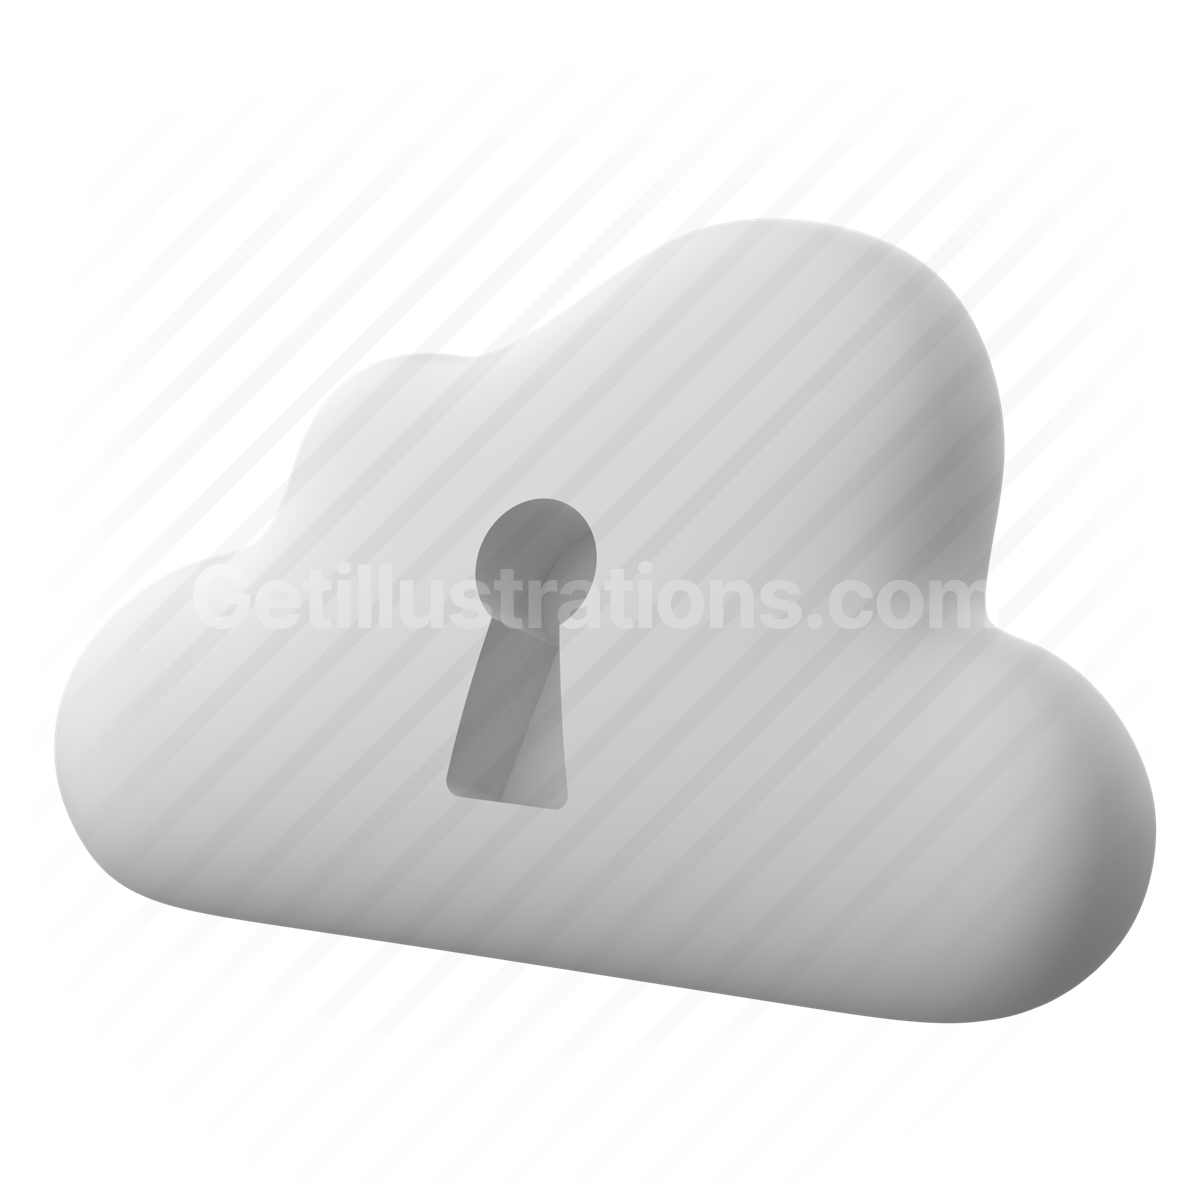 cloud, store, save, transfer, lock, login, protection, safety